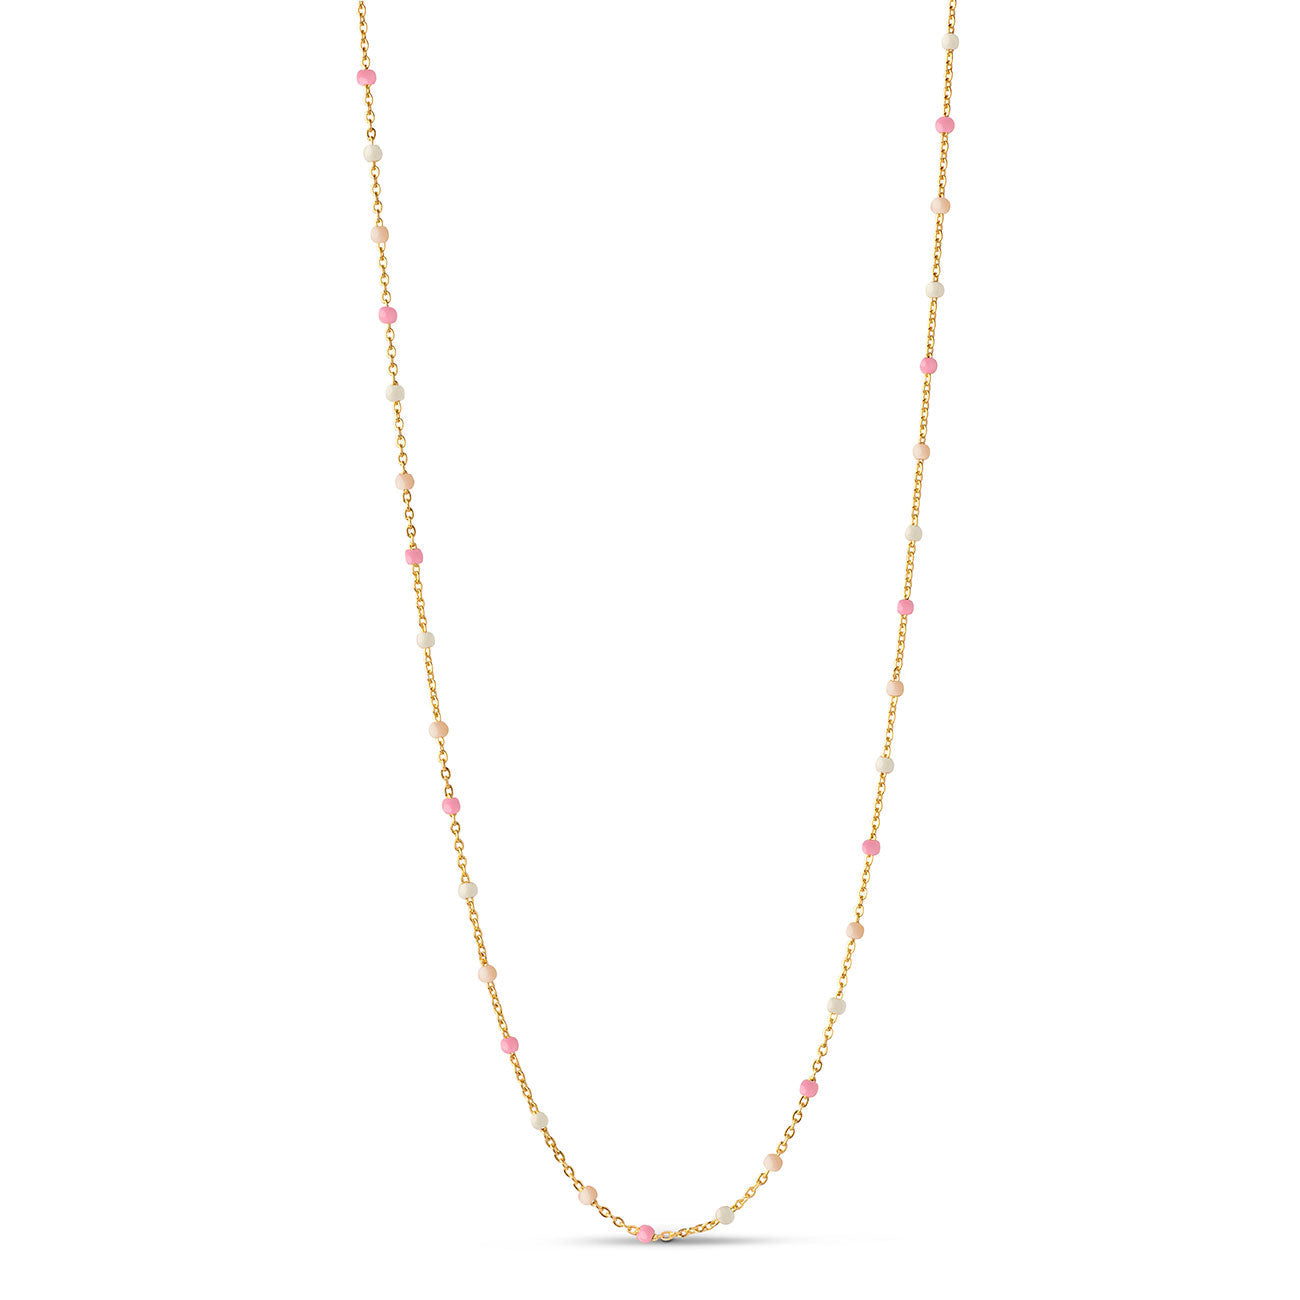 Lola necklace / Tropical